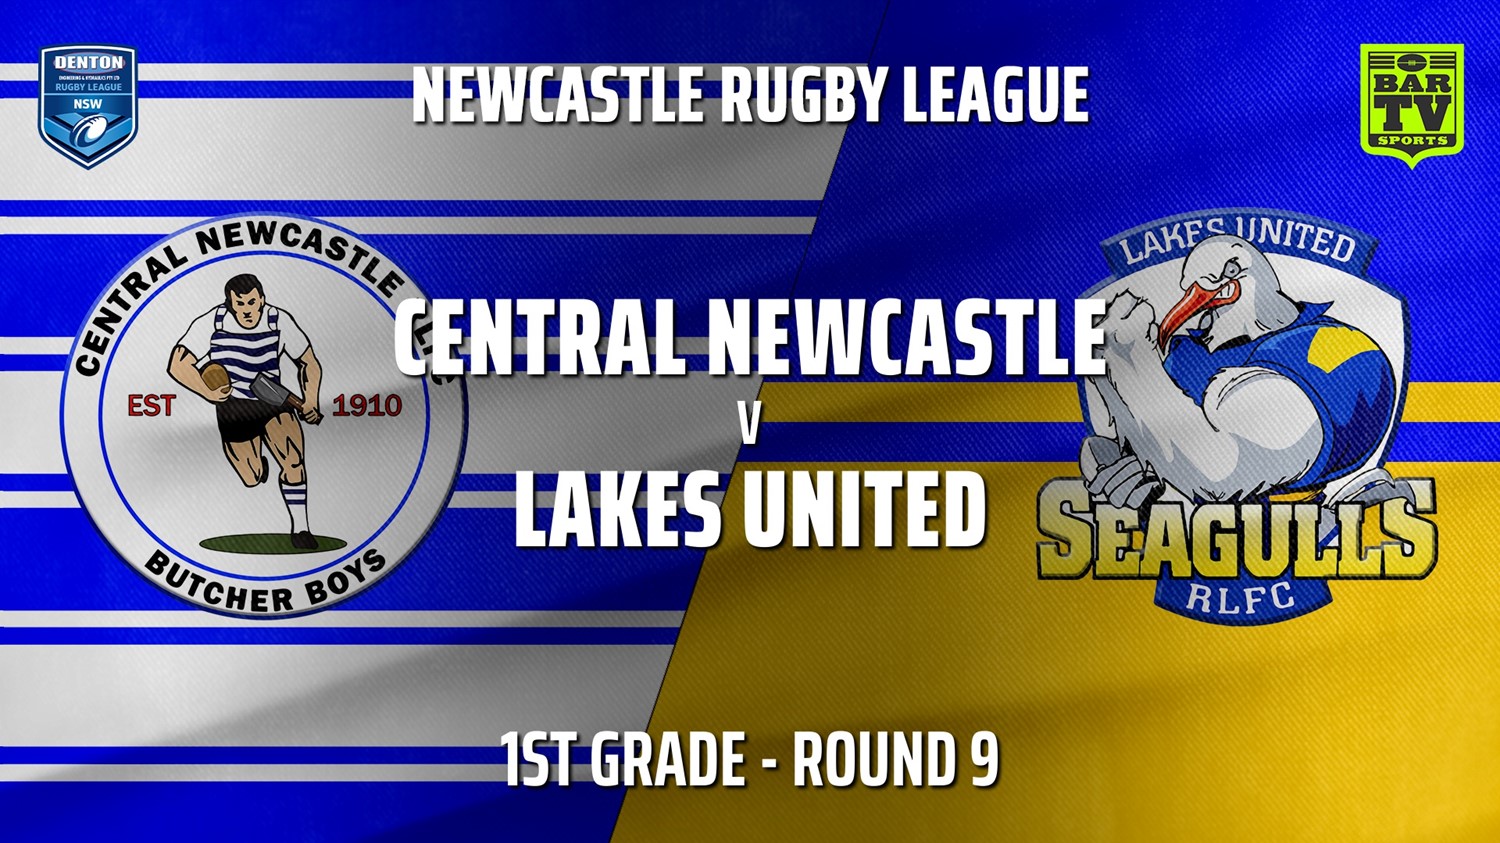 210523-Newcastle Rugby League Round 9 - 1st Grade - Central Newcastle v Lakes United Minigame Slate Image